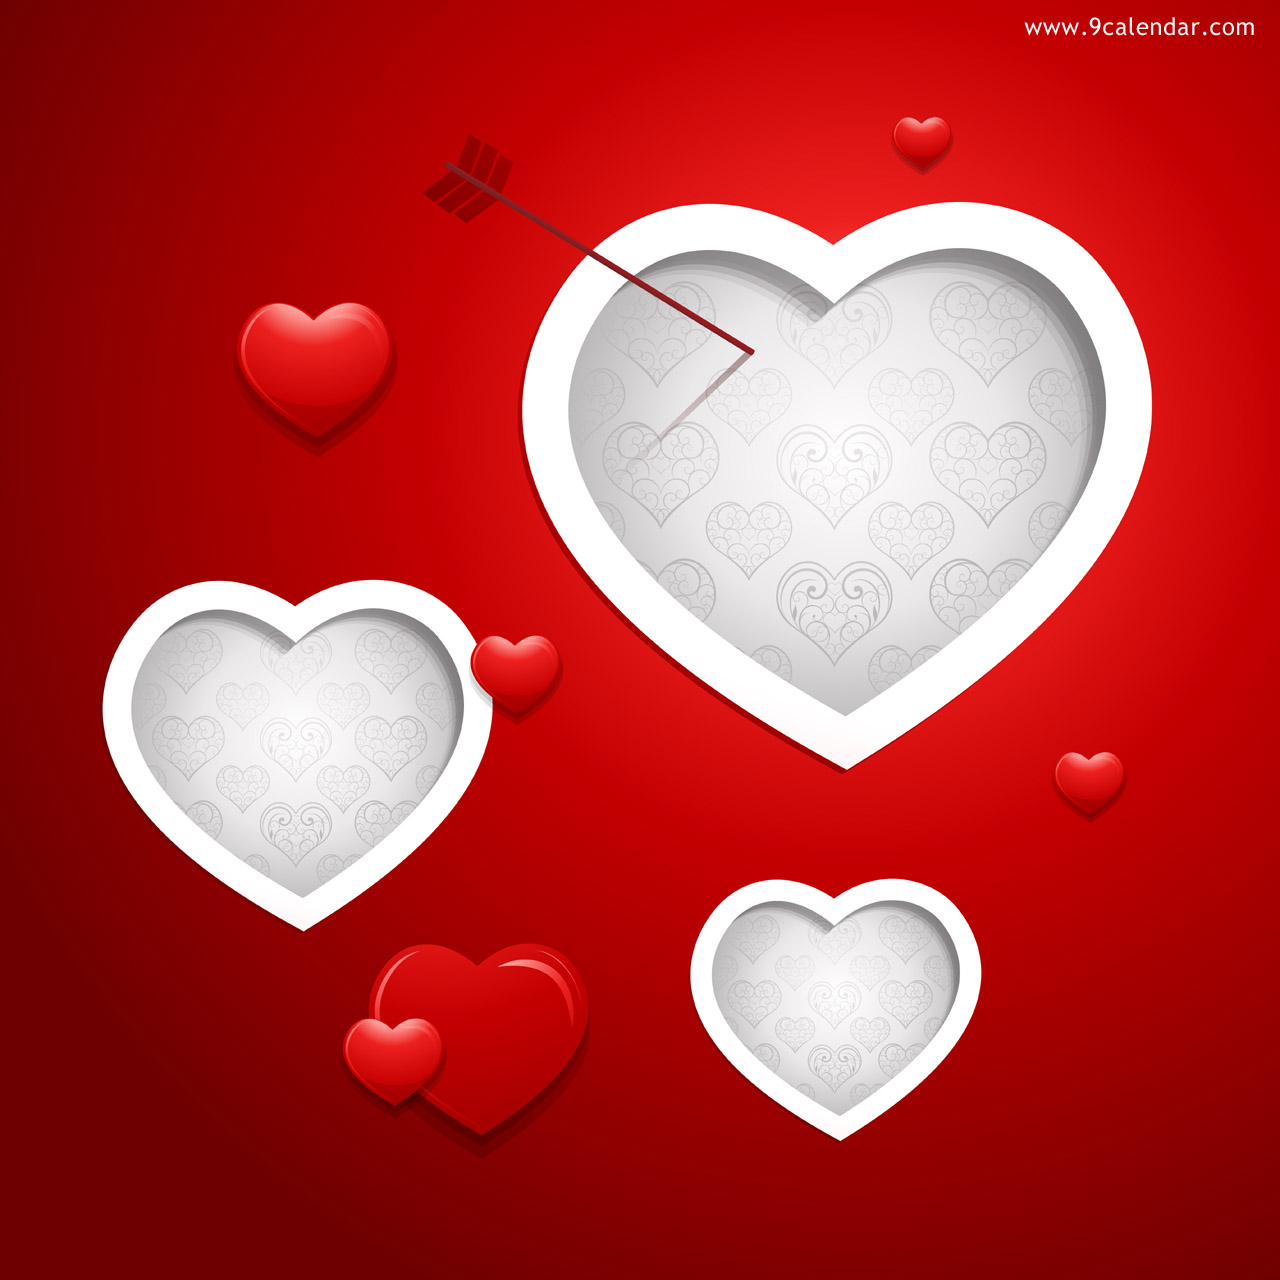 Valentines Day Background Pictures HD Wallpaper